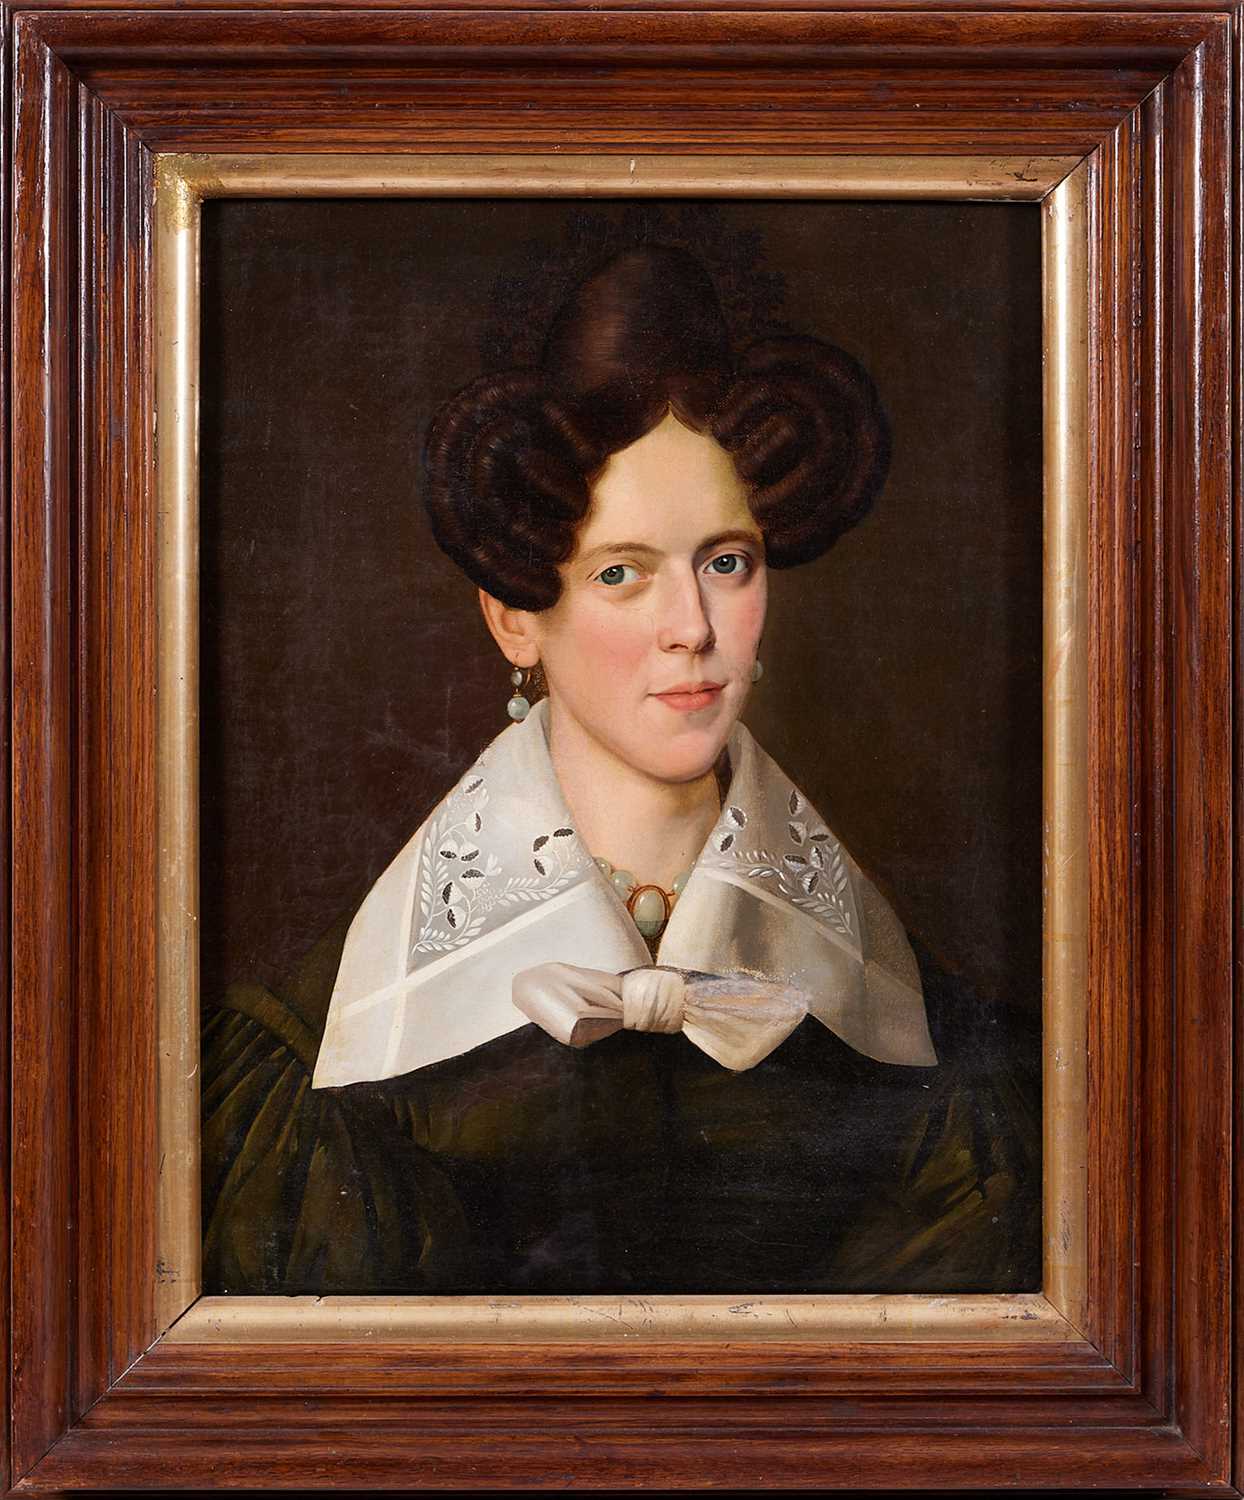 AMERICAN SCHOOL, CIRCA 1830: A PORTRAIT OF A LADY WITH LACE COLLAR